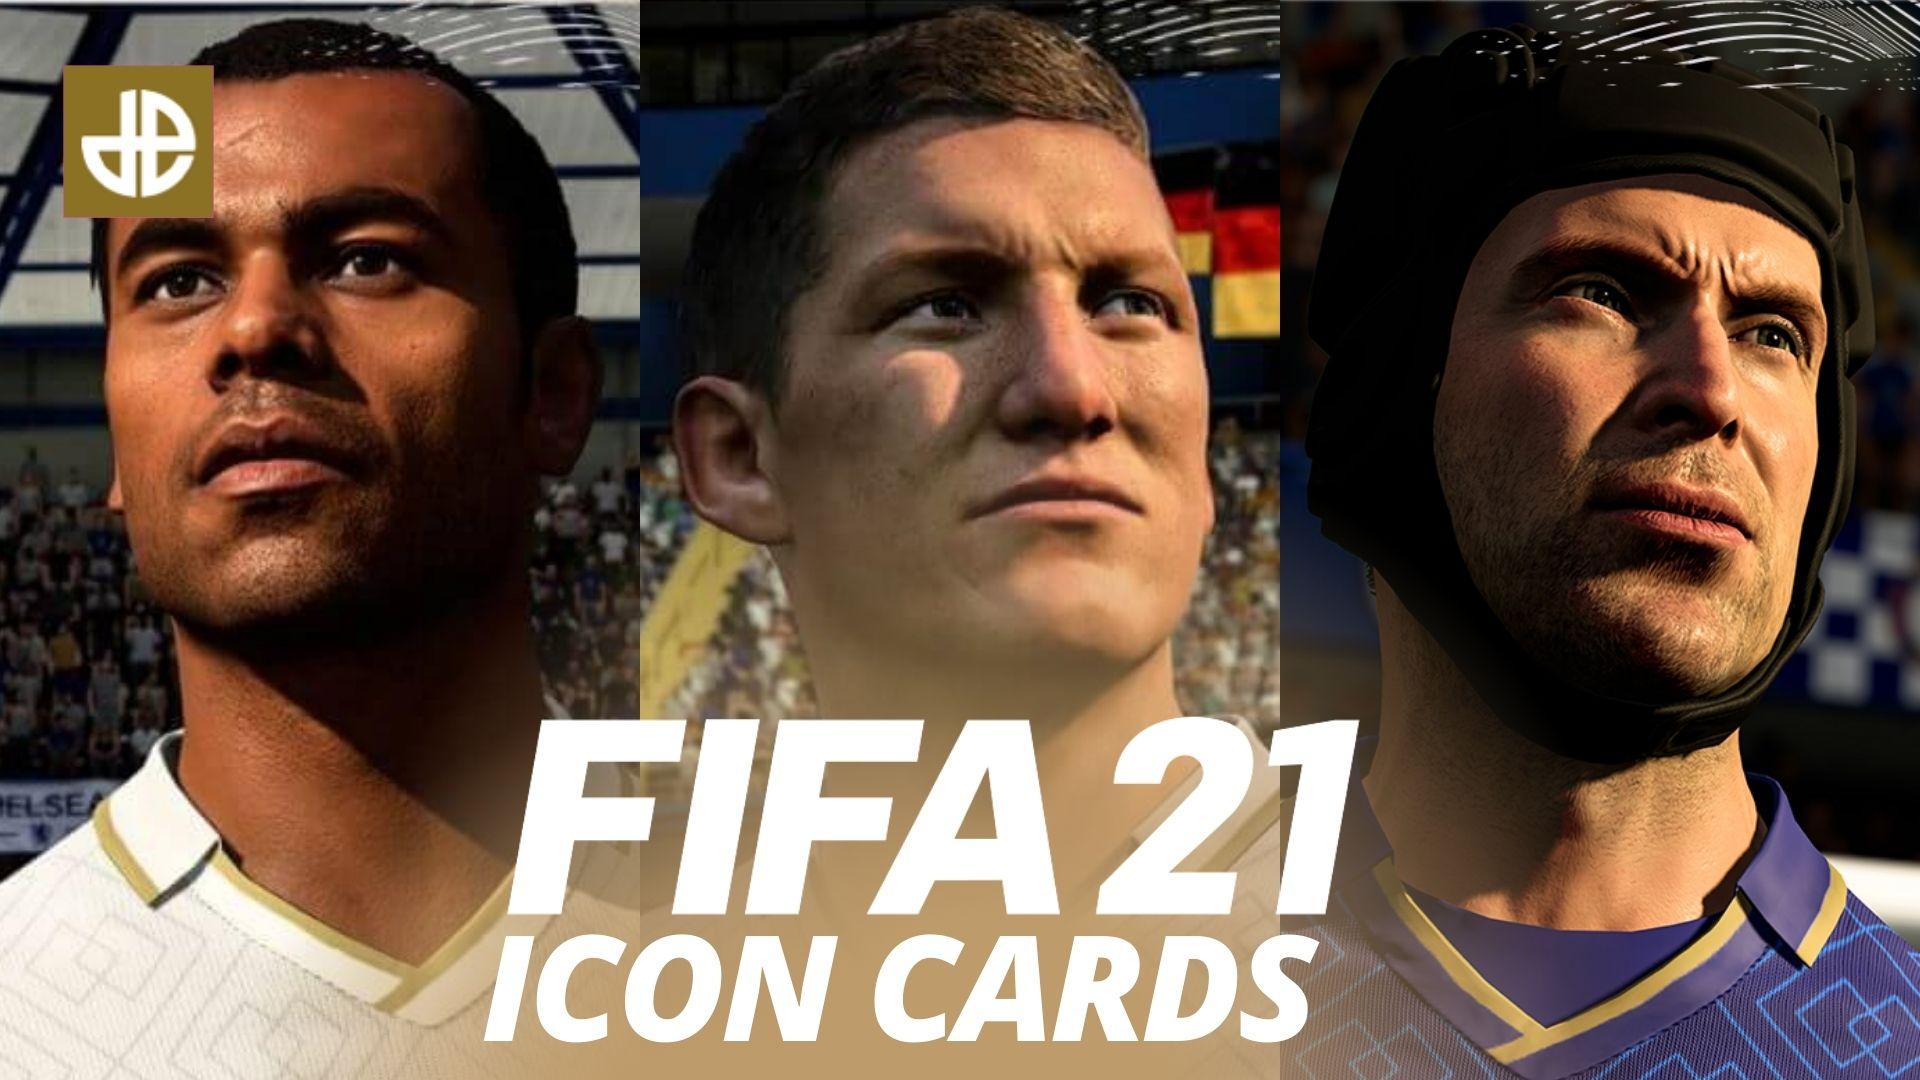 FIFA 21 ICONs list image including Cech, Cole, and Schweinsteiger